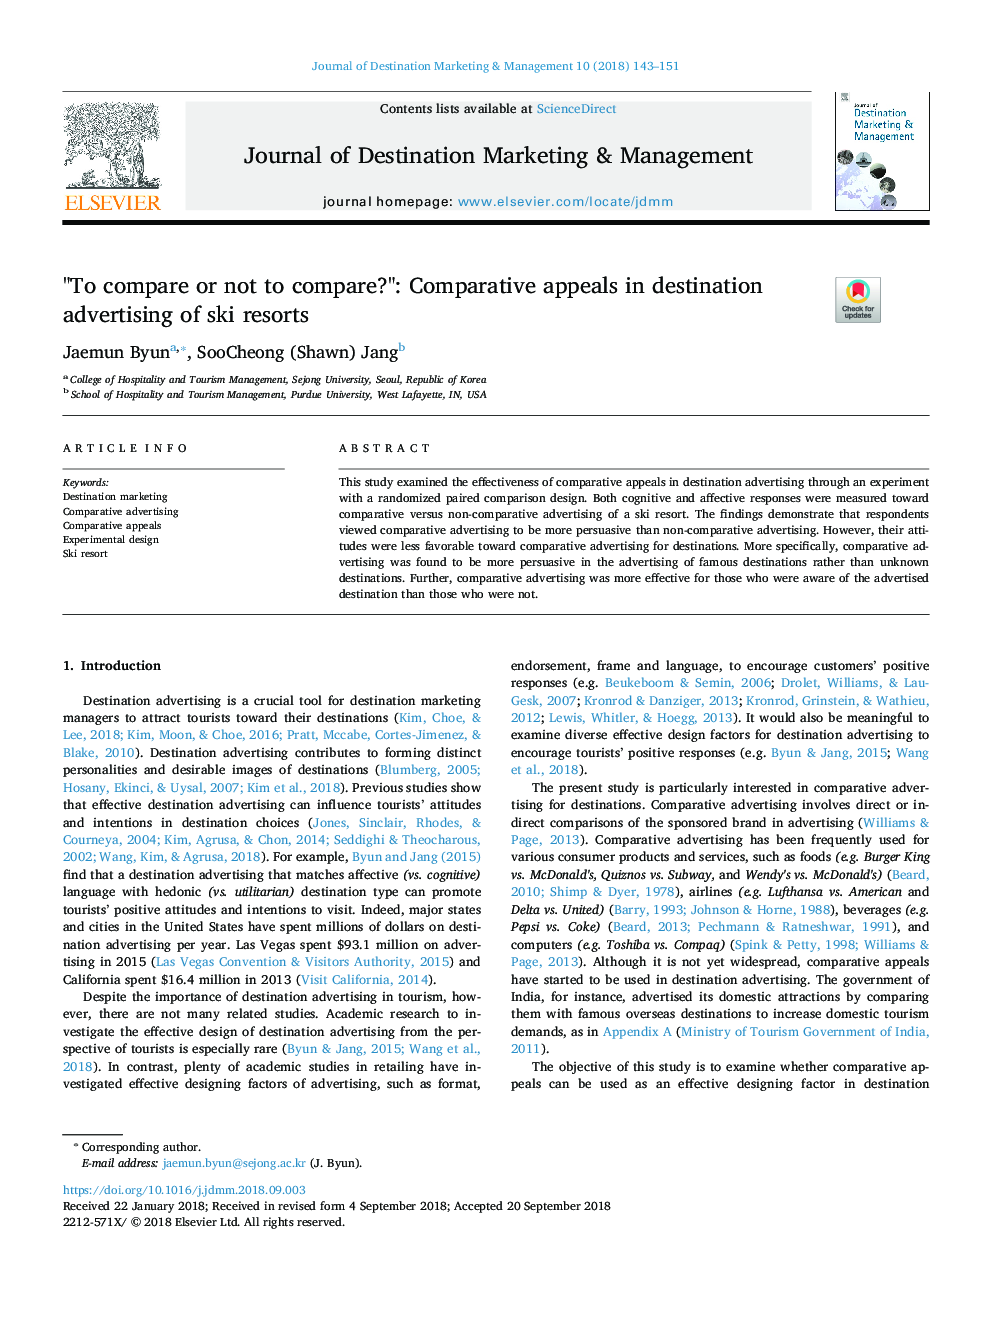 "To compare or not to compare?": Comparative appeals in destination advertising of ski resorts